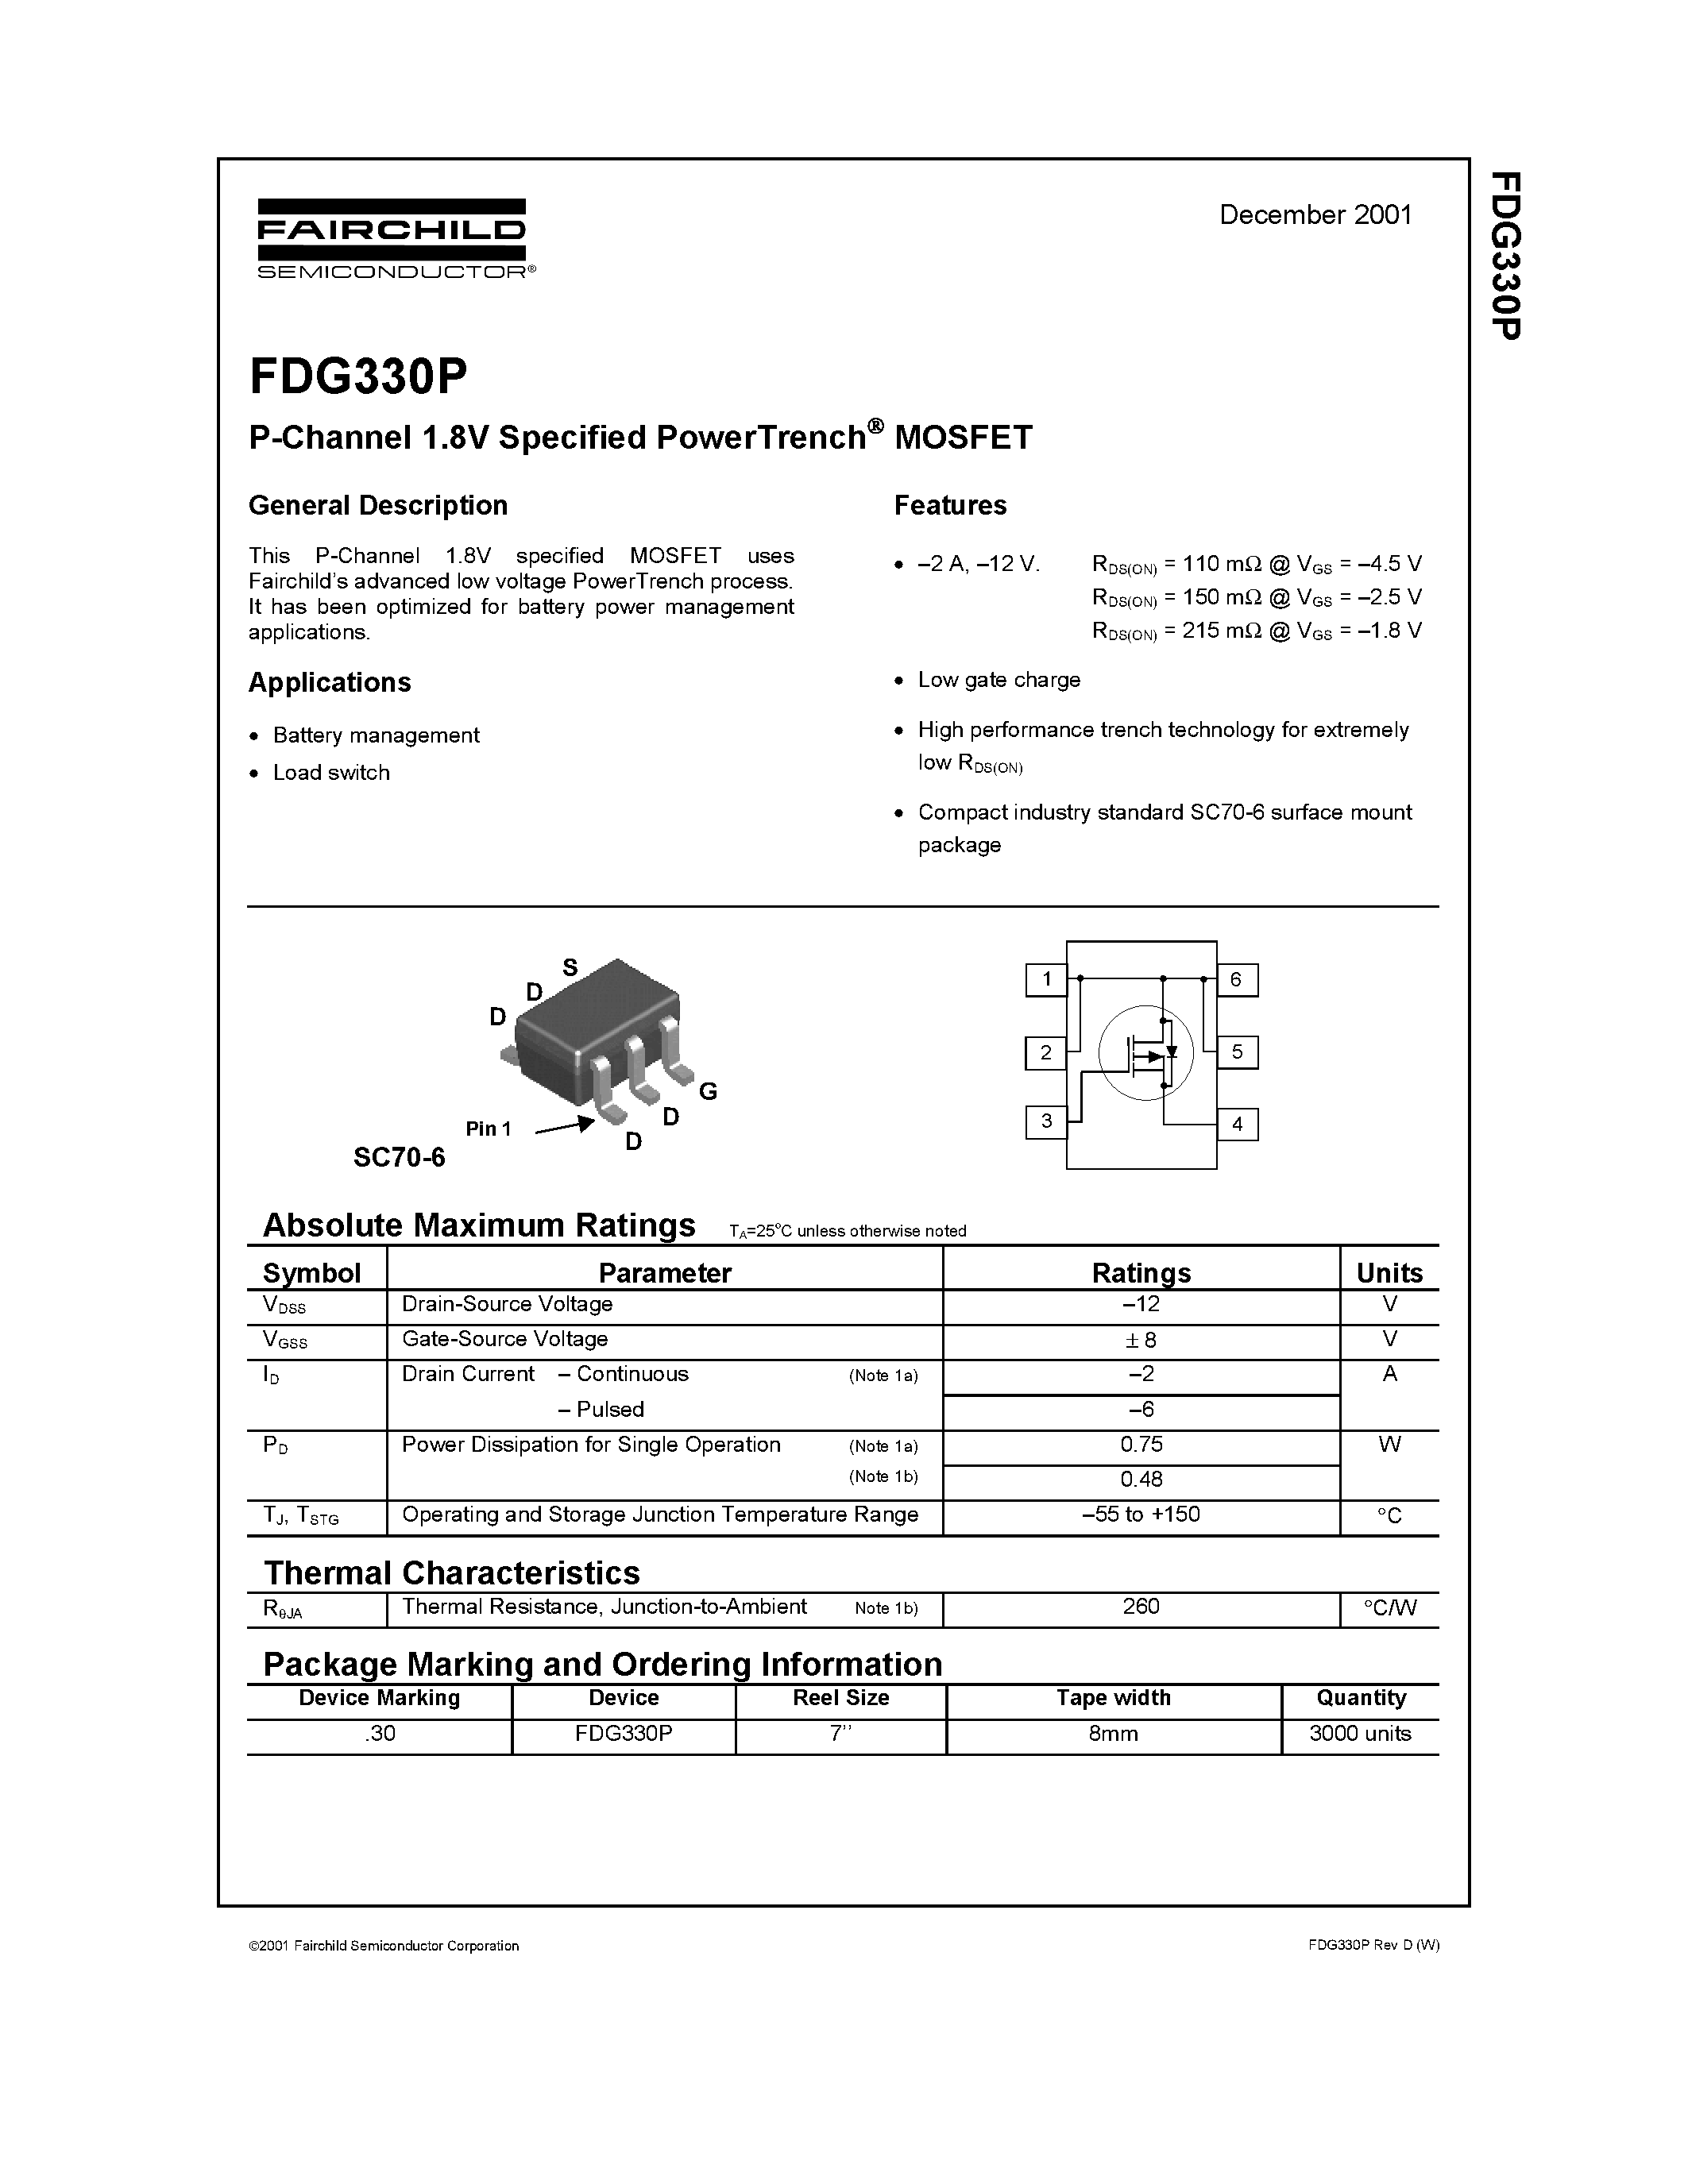 Даташит FDG330P-P-Channel 1.8V Specified PowerTrench MOSFET страница 1